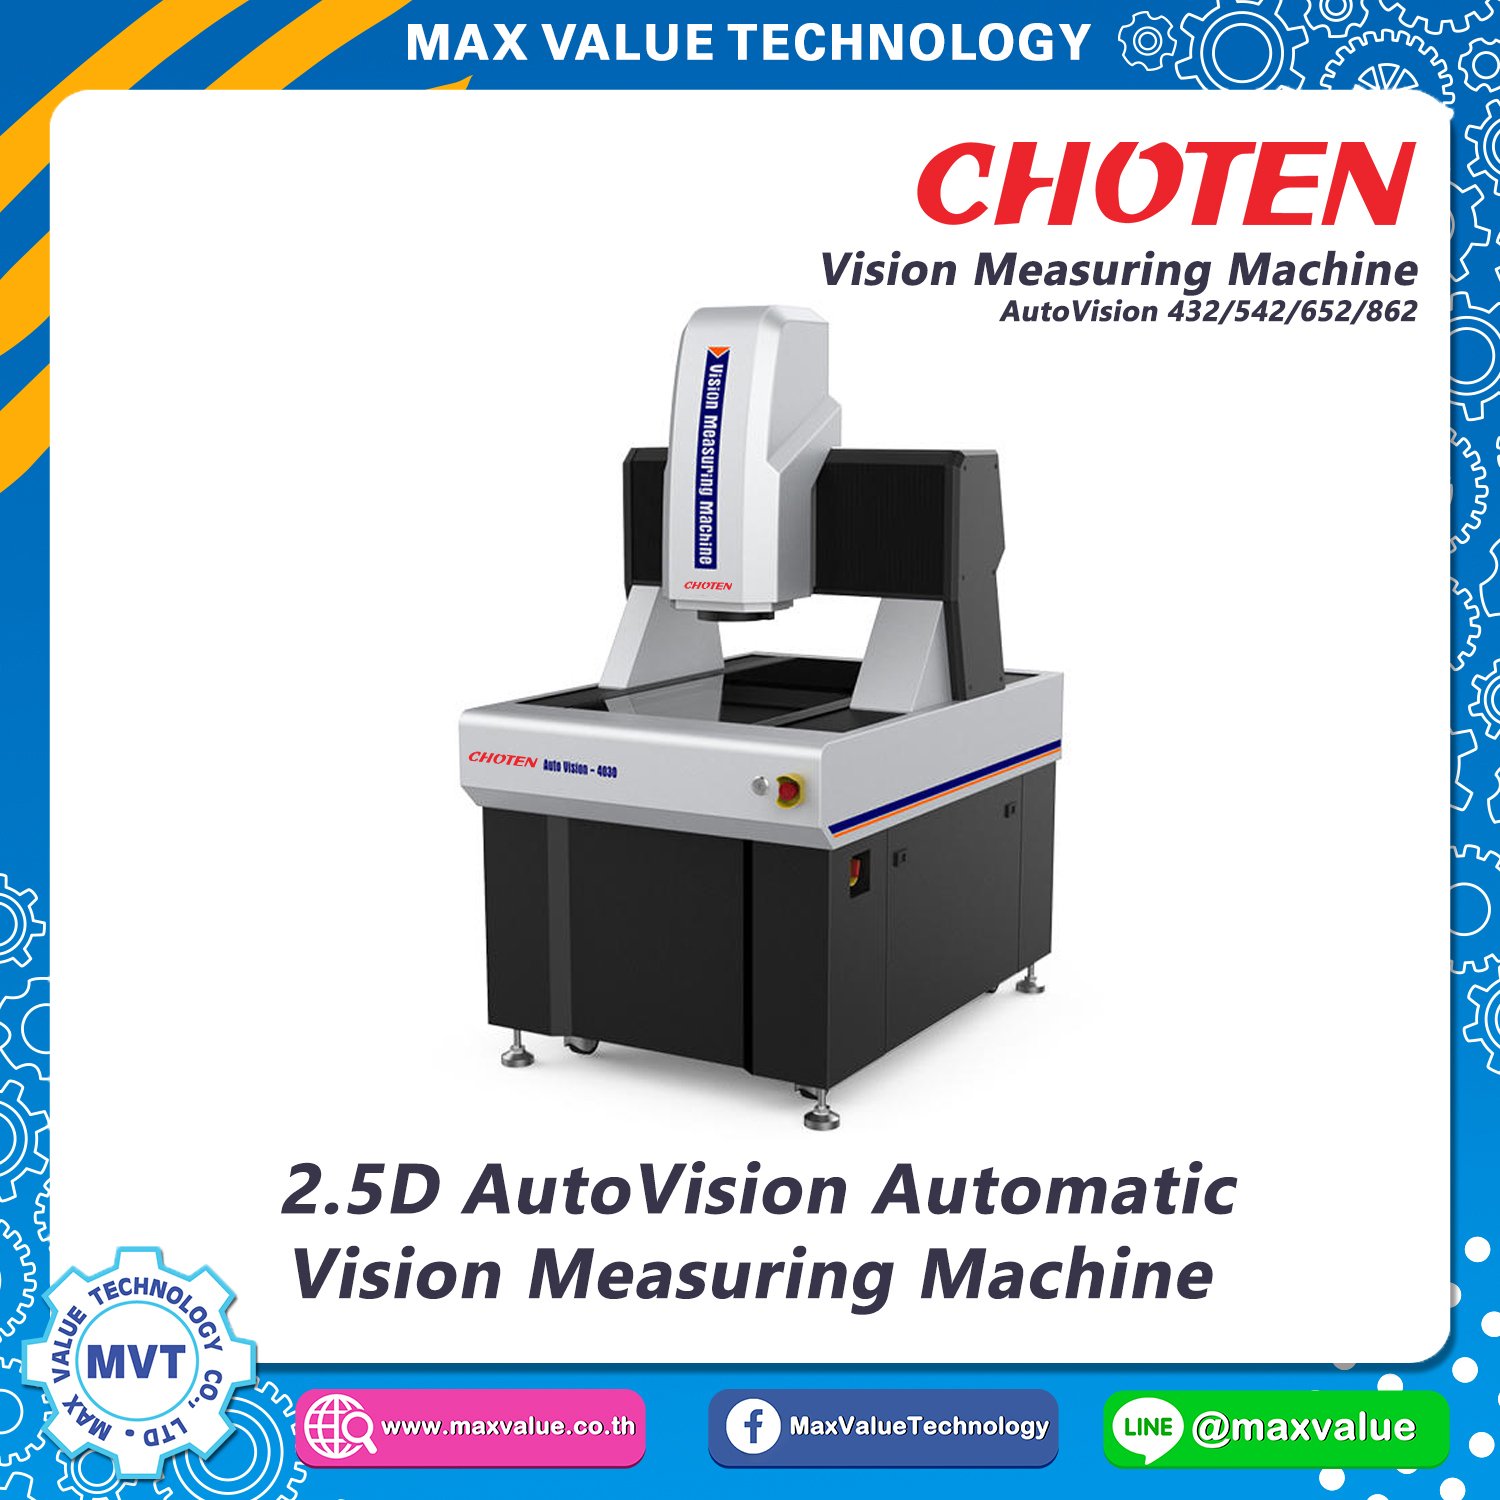 2.5D AutoVision Automatic Video Measuring System